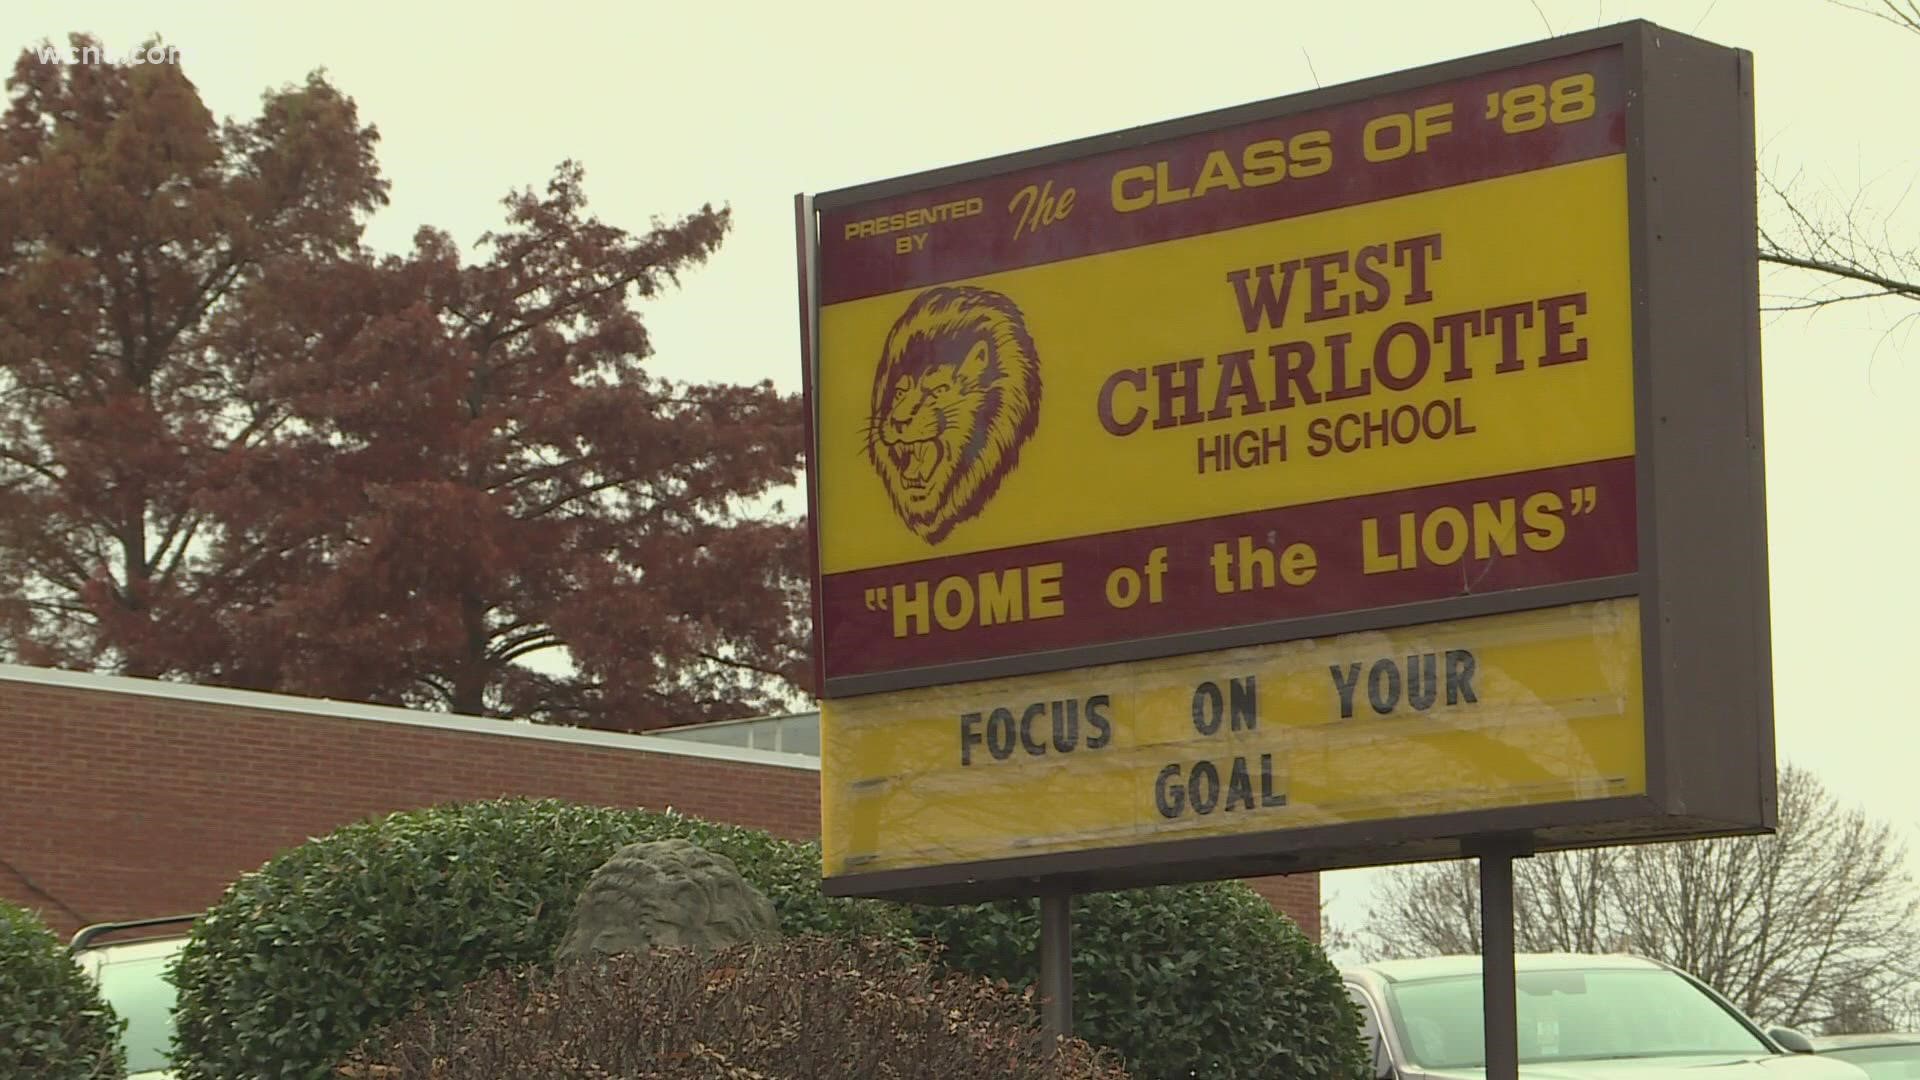 Three weapons were found on Charlotte high school campuses Thursday, including two in the parking lot of West Charlotte High School.